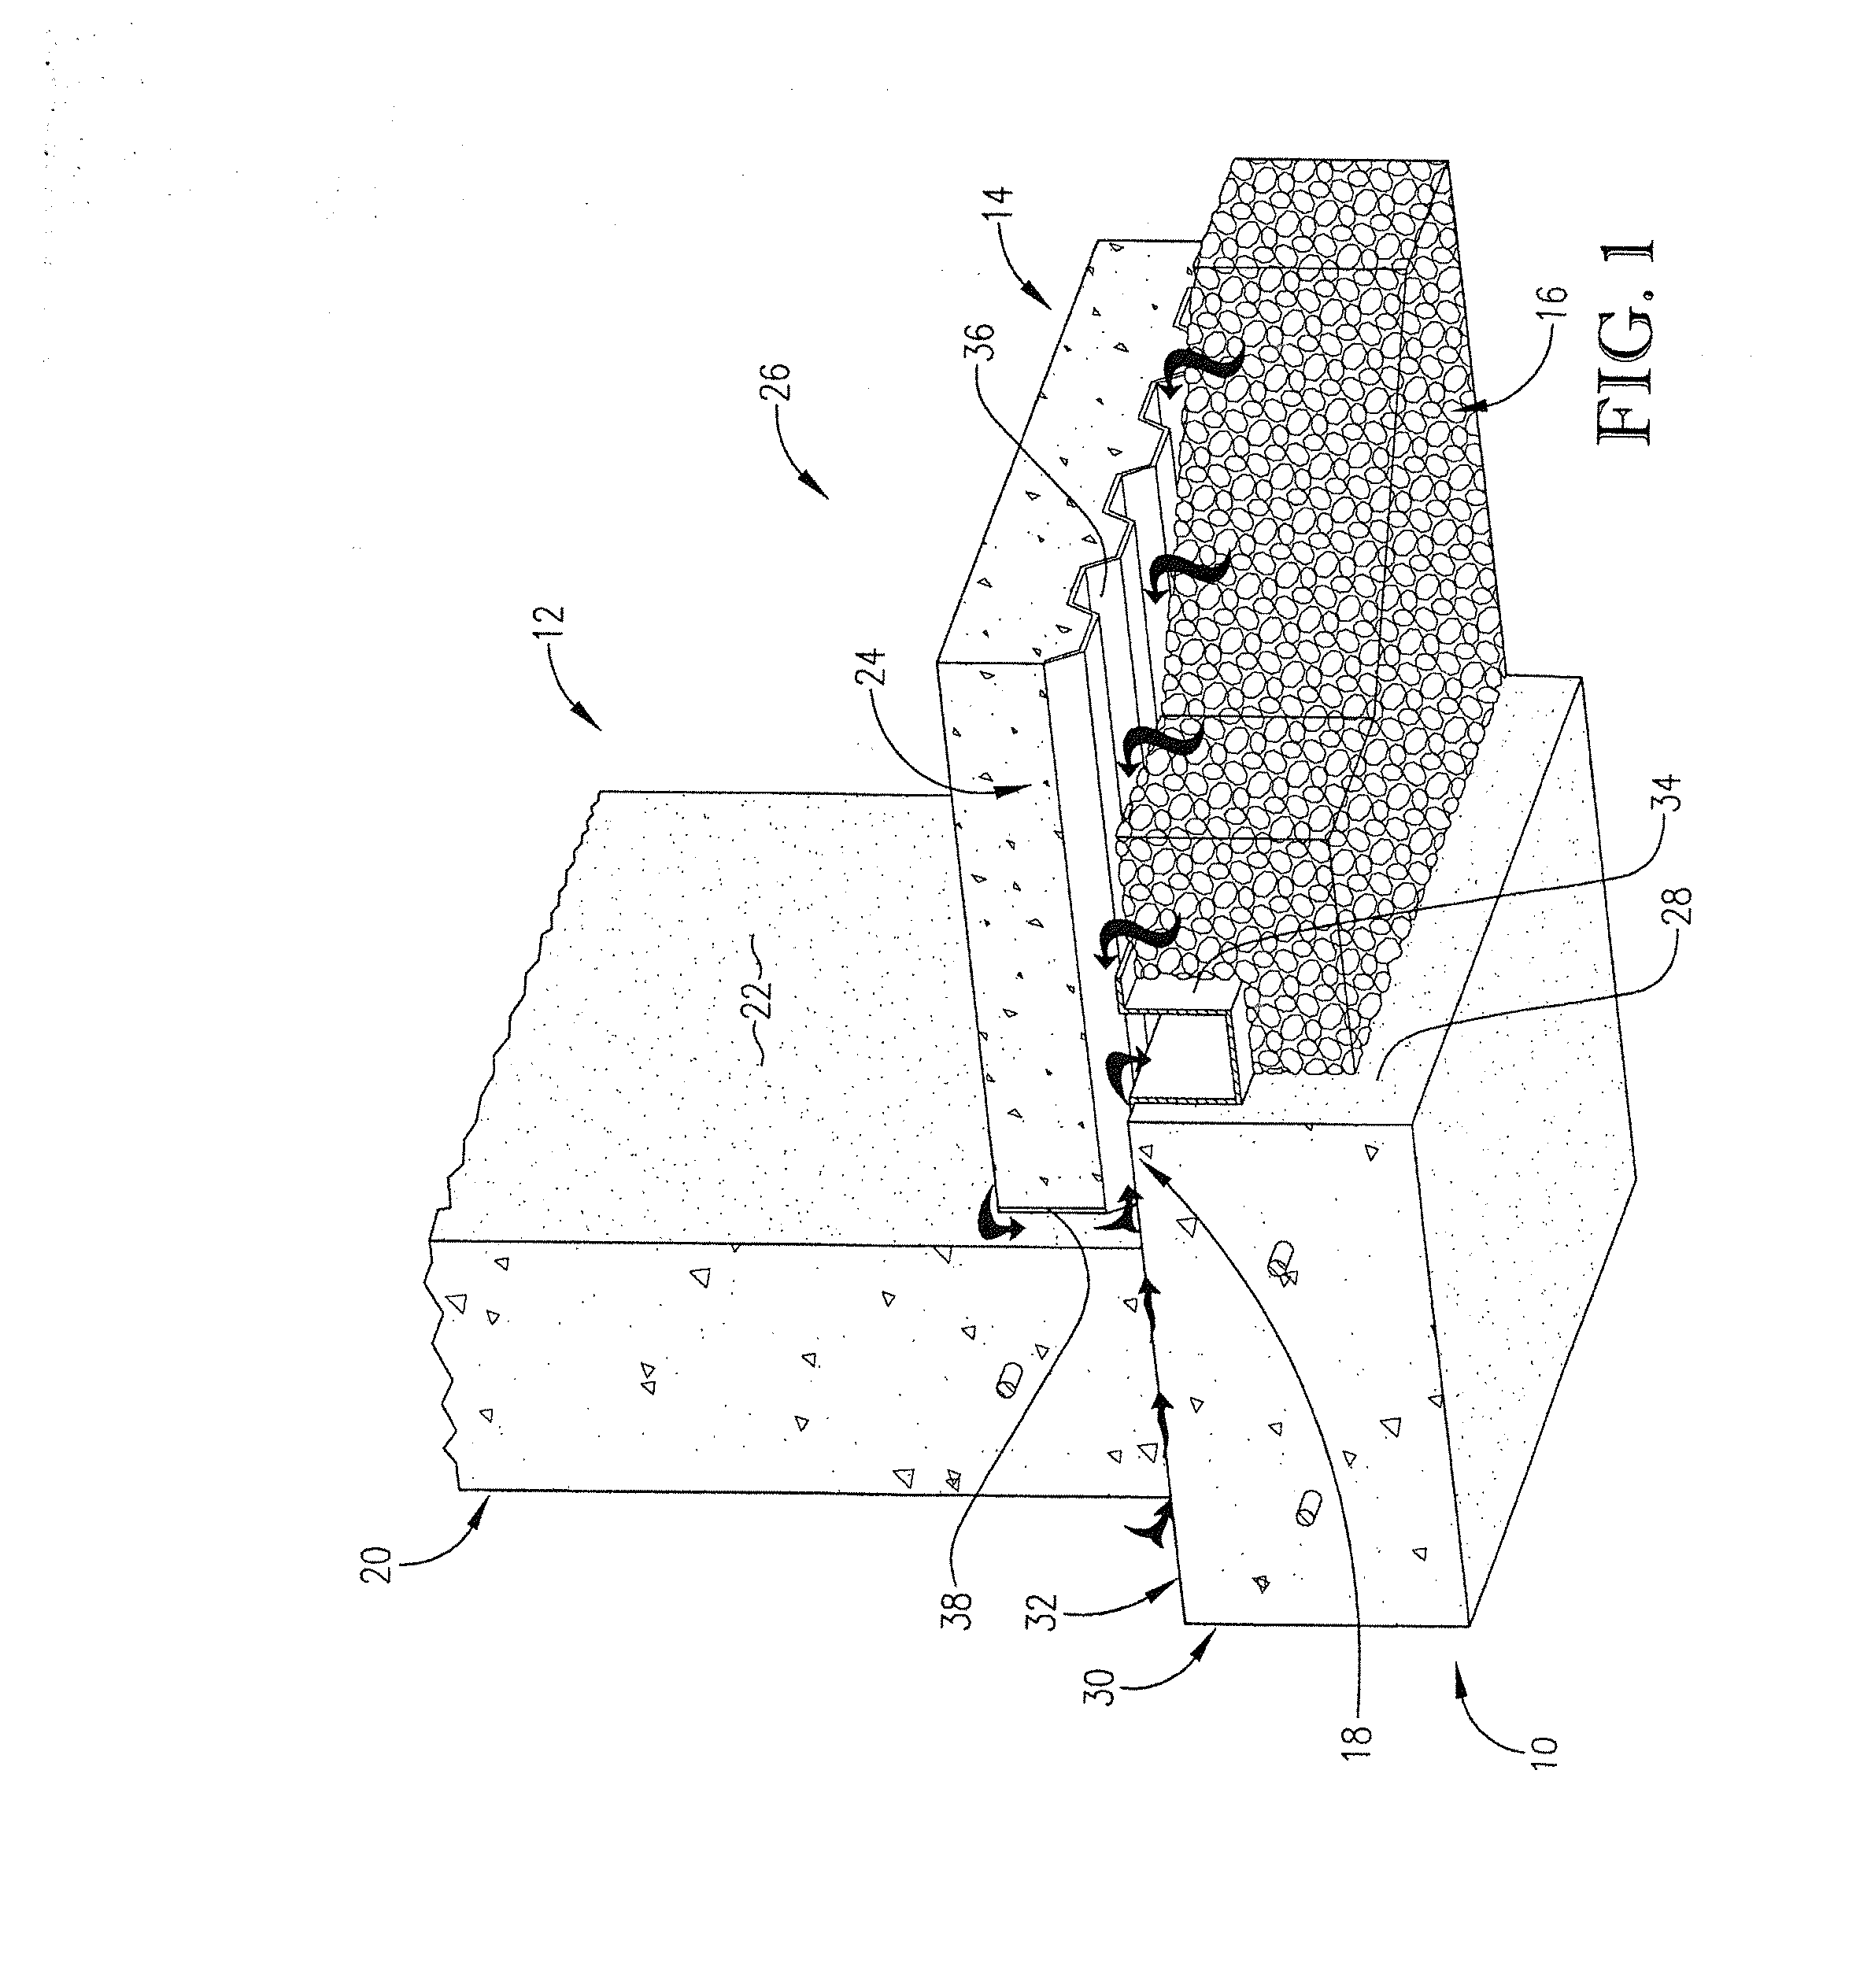 Apparatus and method for diverting water at basement joints